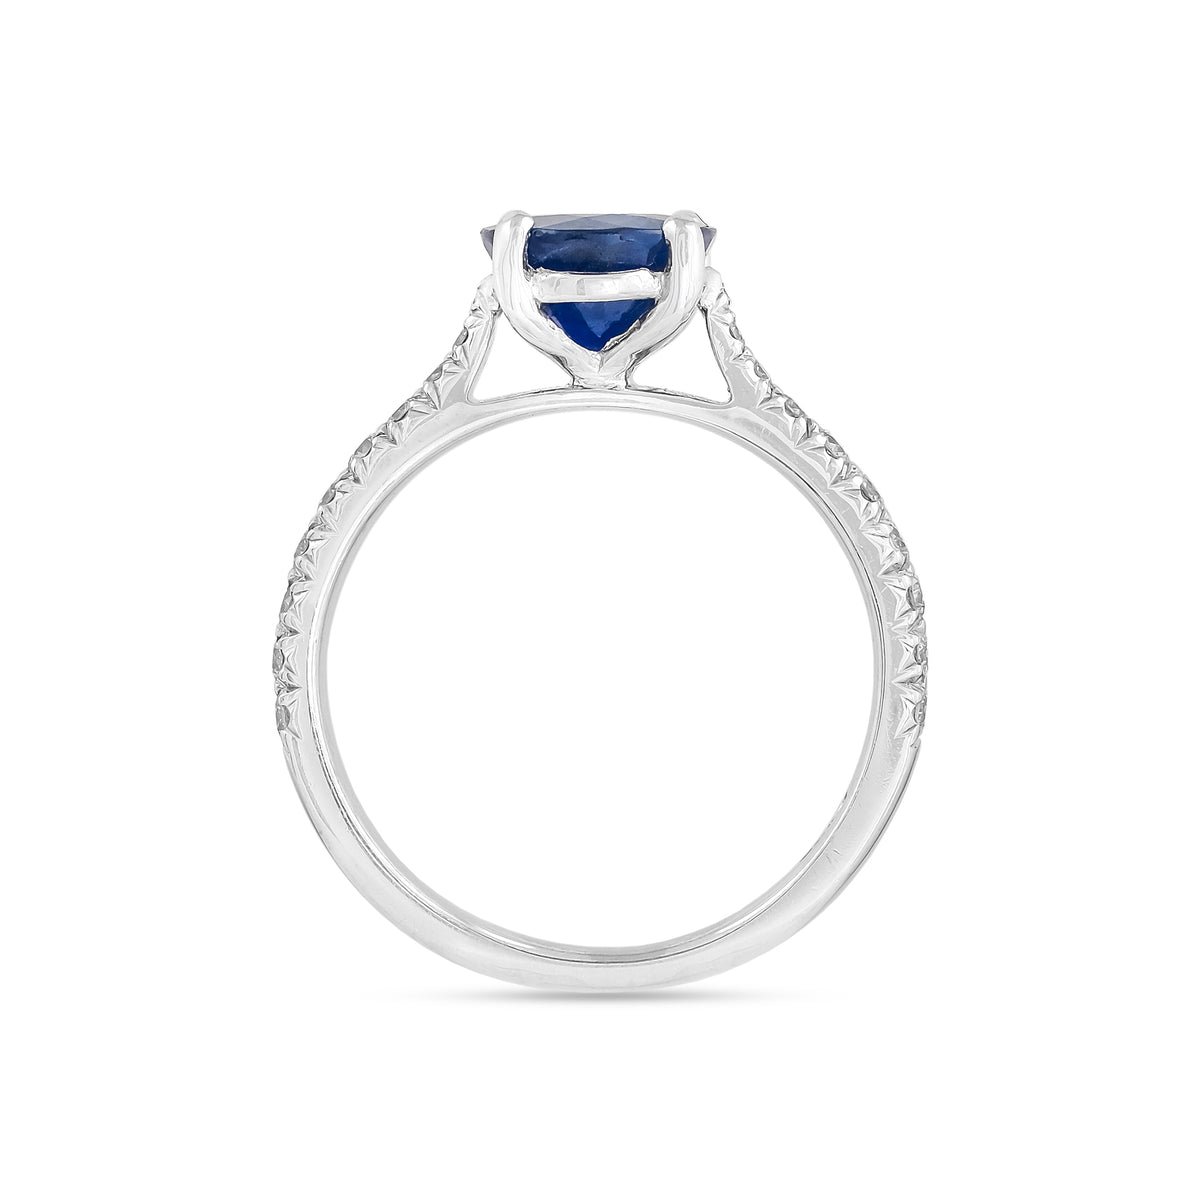 Vintage 18ct White Gold Sapphire and Diamond Ring